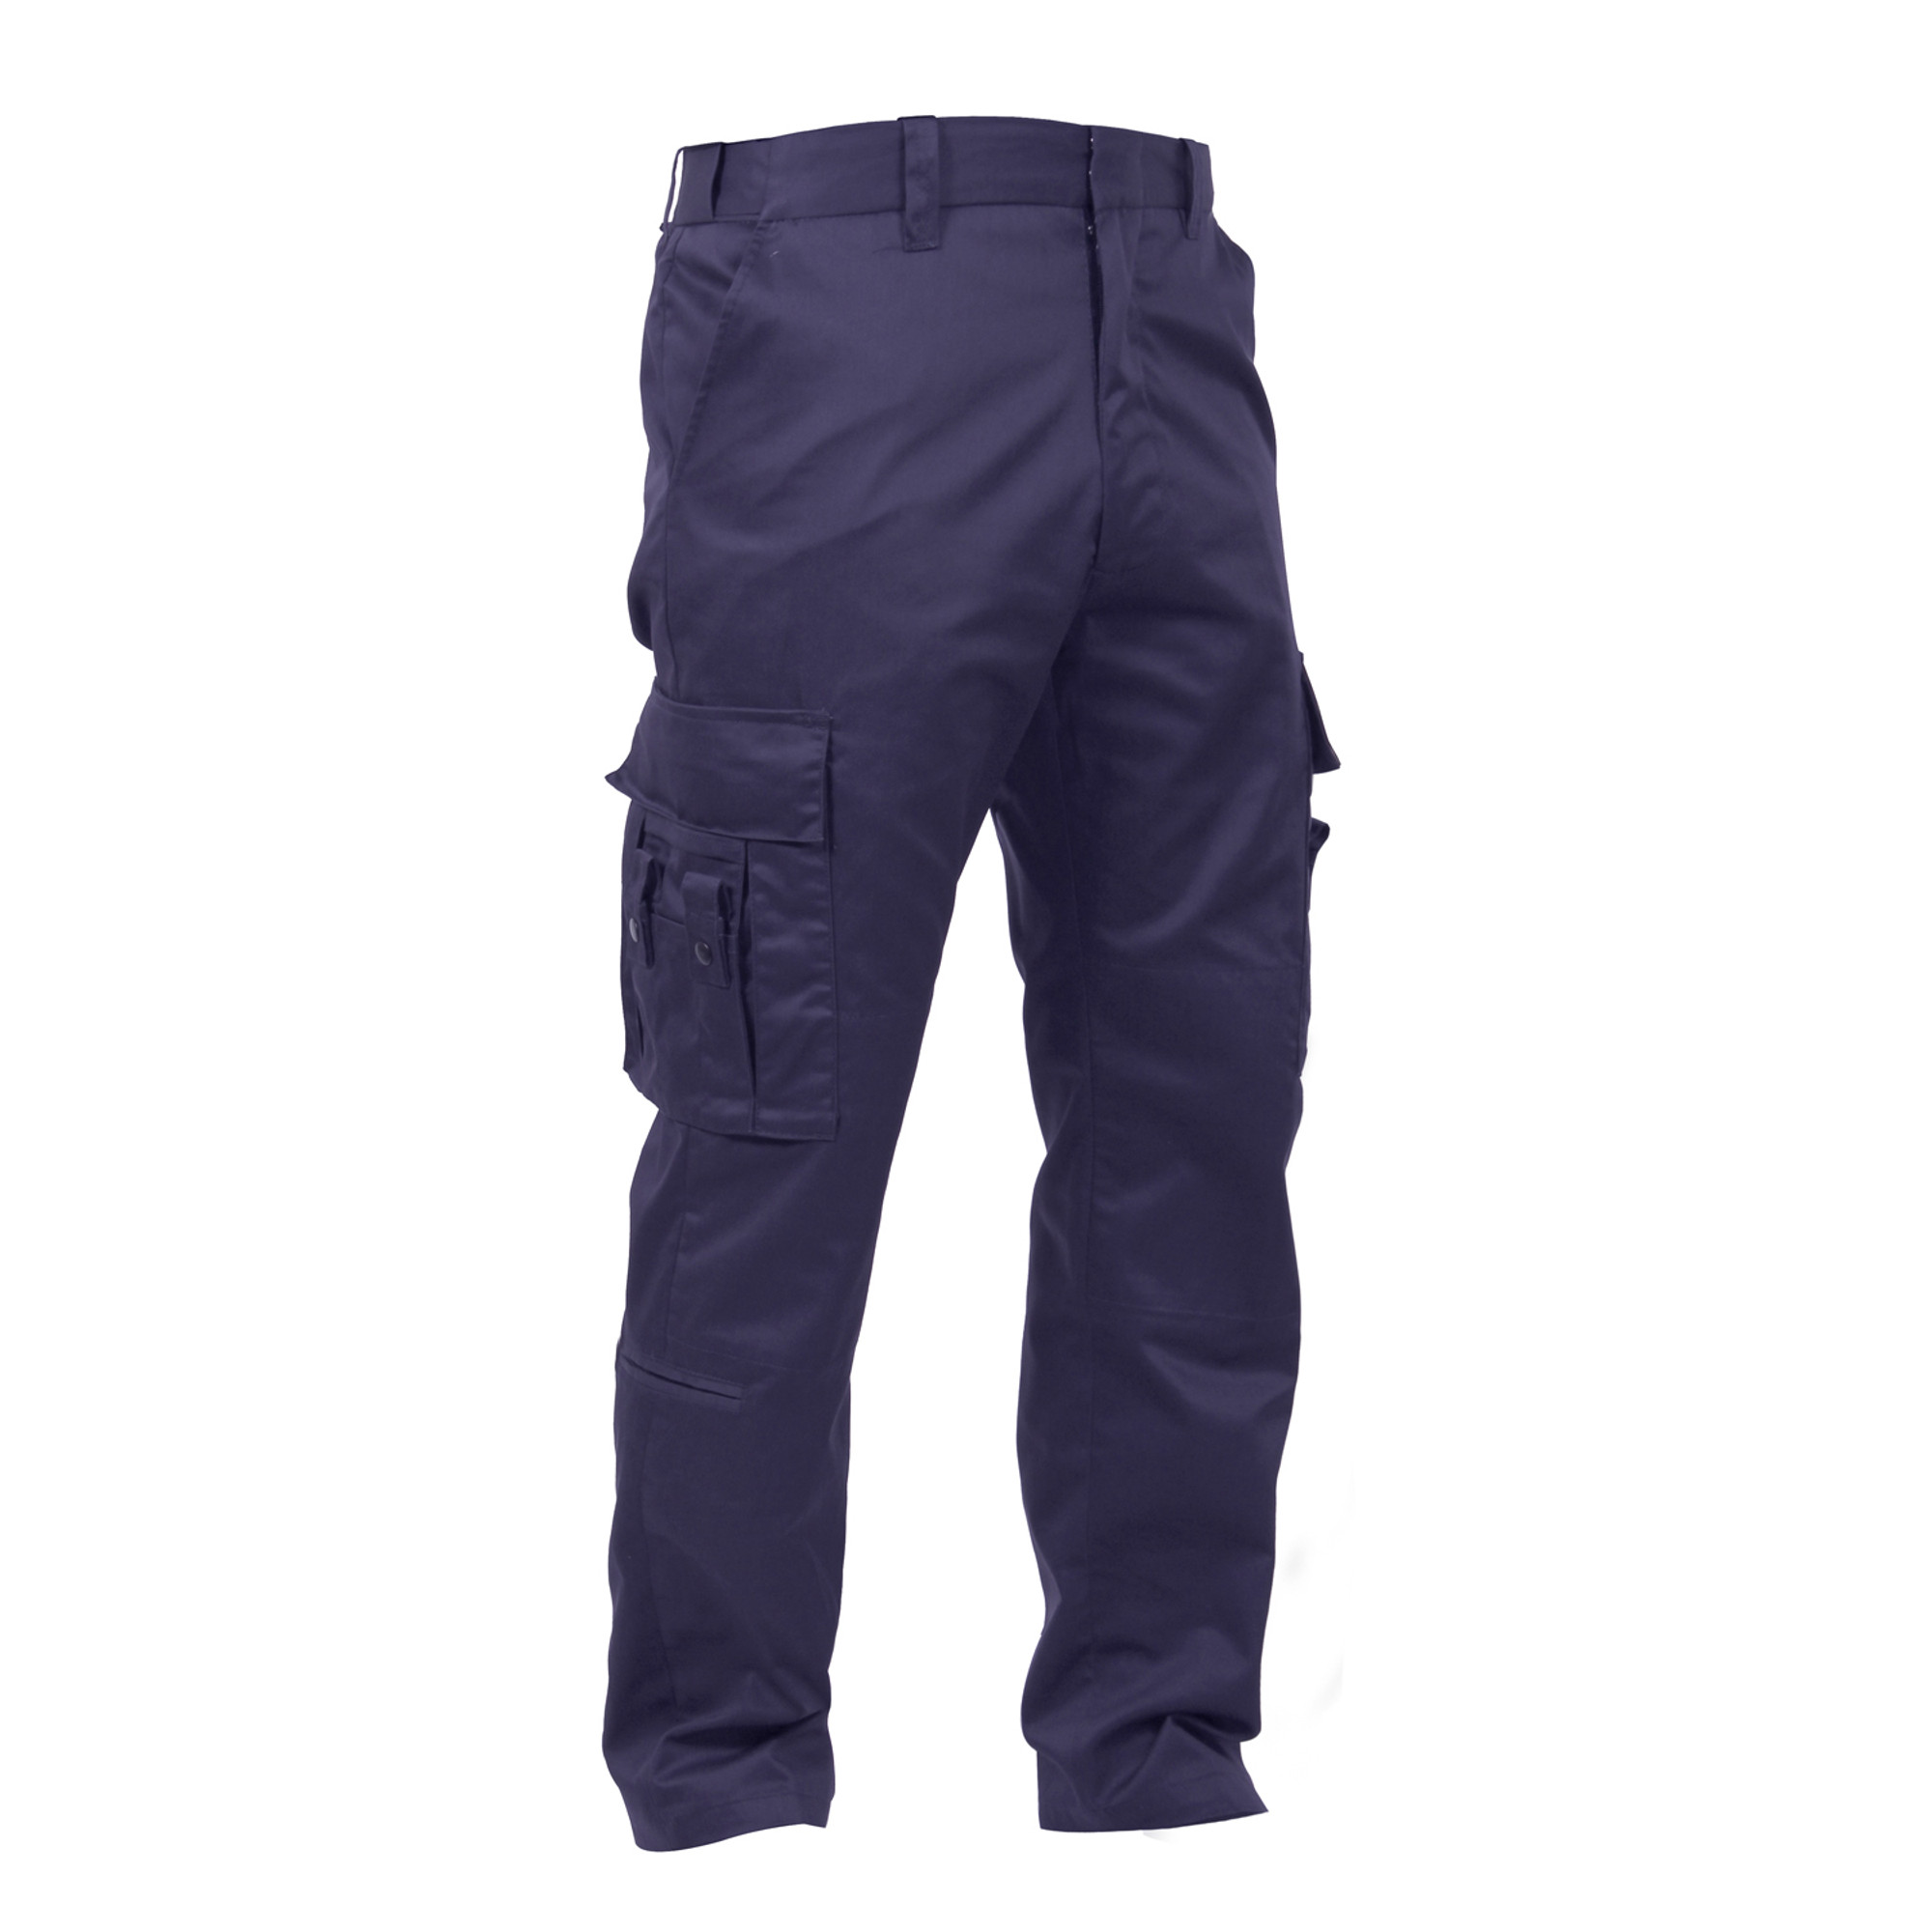 Rothco Deluxe EMT Paramedic Pants - Navy Blue